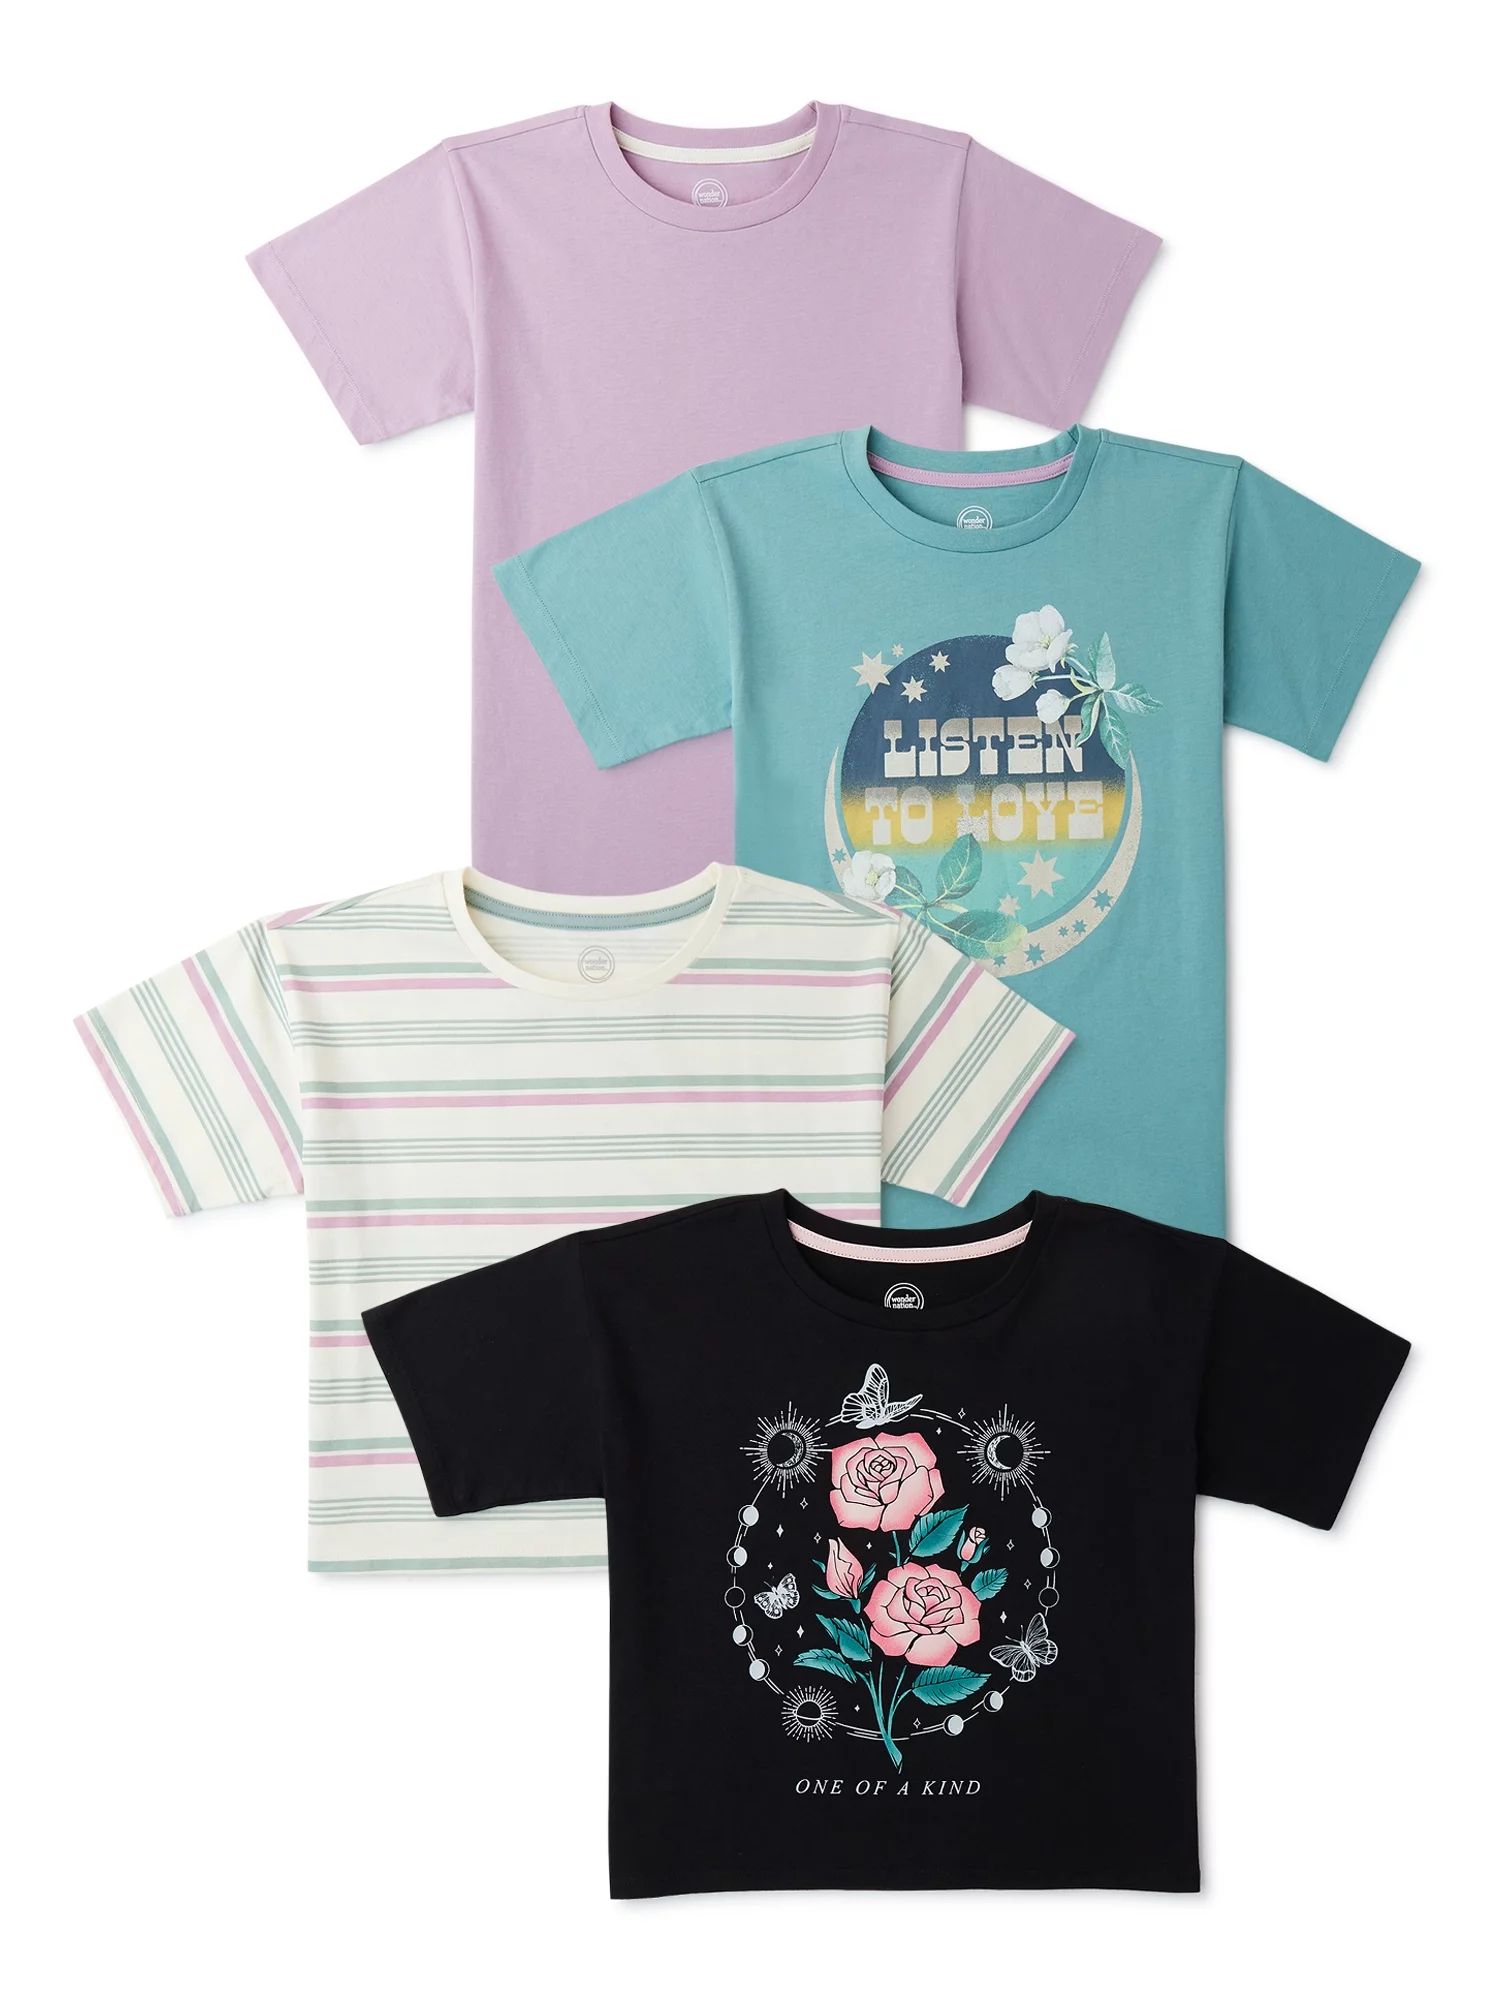 Wonder Nation Girls' Graphic, Stripe, and Solid Tees, 4-Pack, Sizes 4-18 & Plus | Walmart (US)